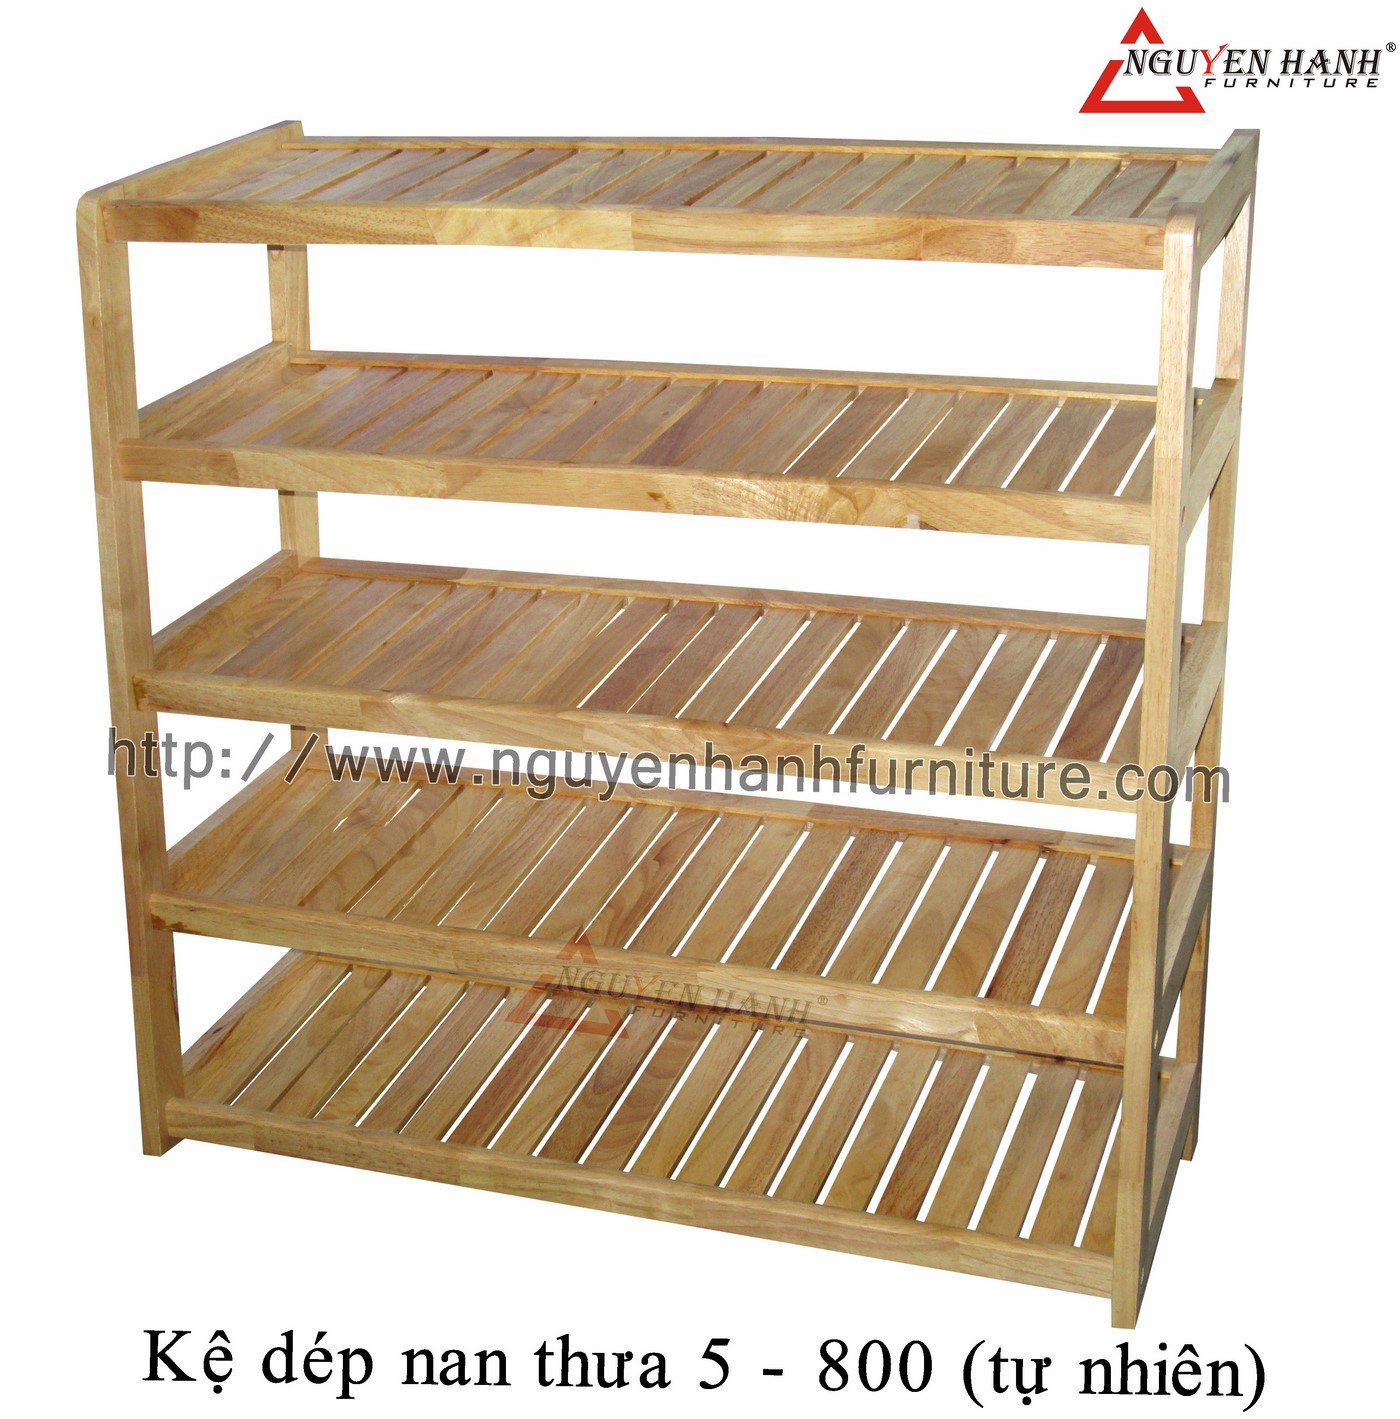 Name product: Shoeshelf 5 Floors 80 with sparse blades (Natural) - Dimensions: 80 x 30 x 82 (H) - Description: Wood natural rubber